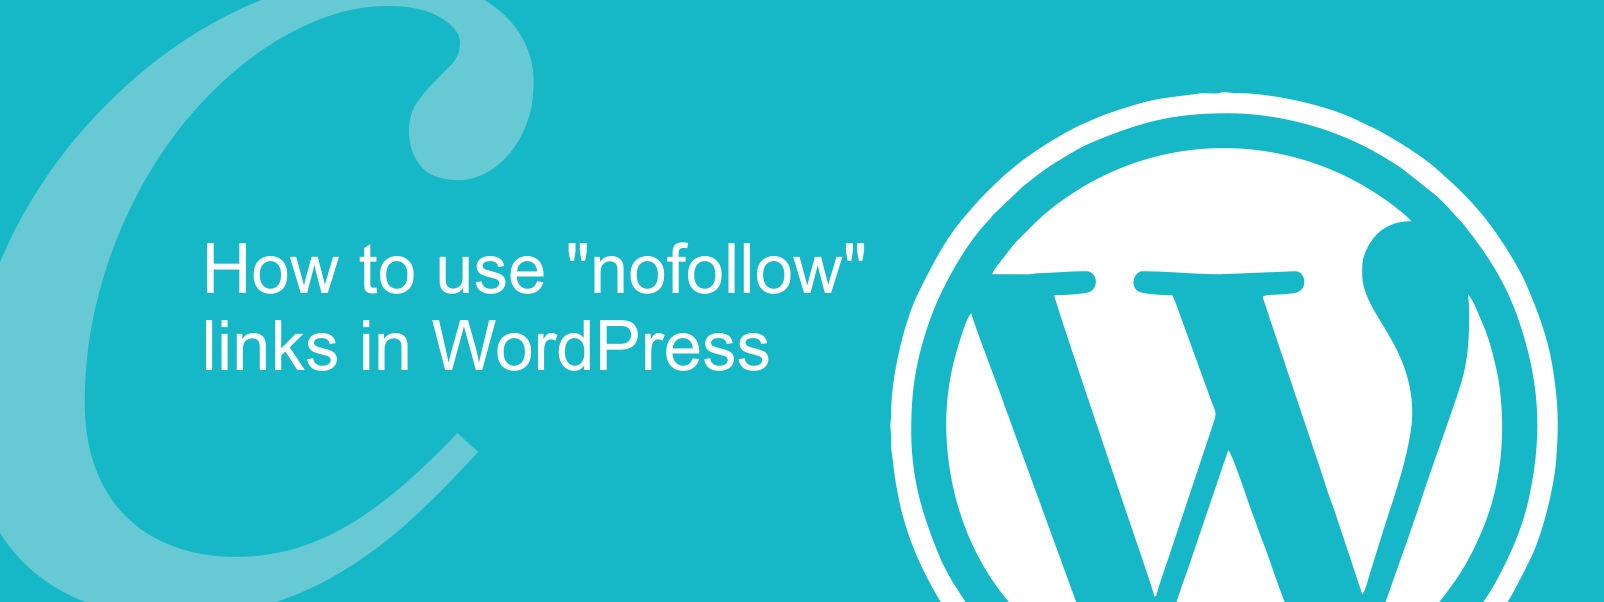 How To Add Nofollow Links in WordPress (for Beginners Guide)